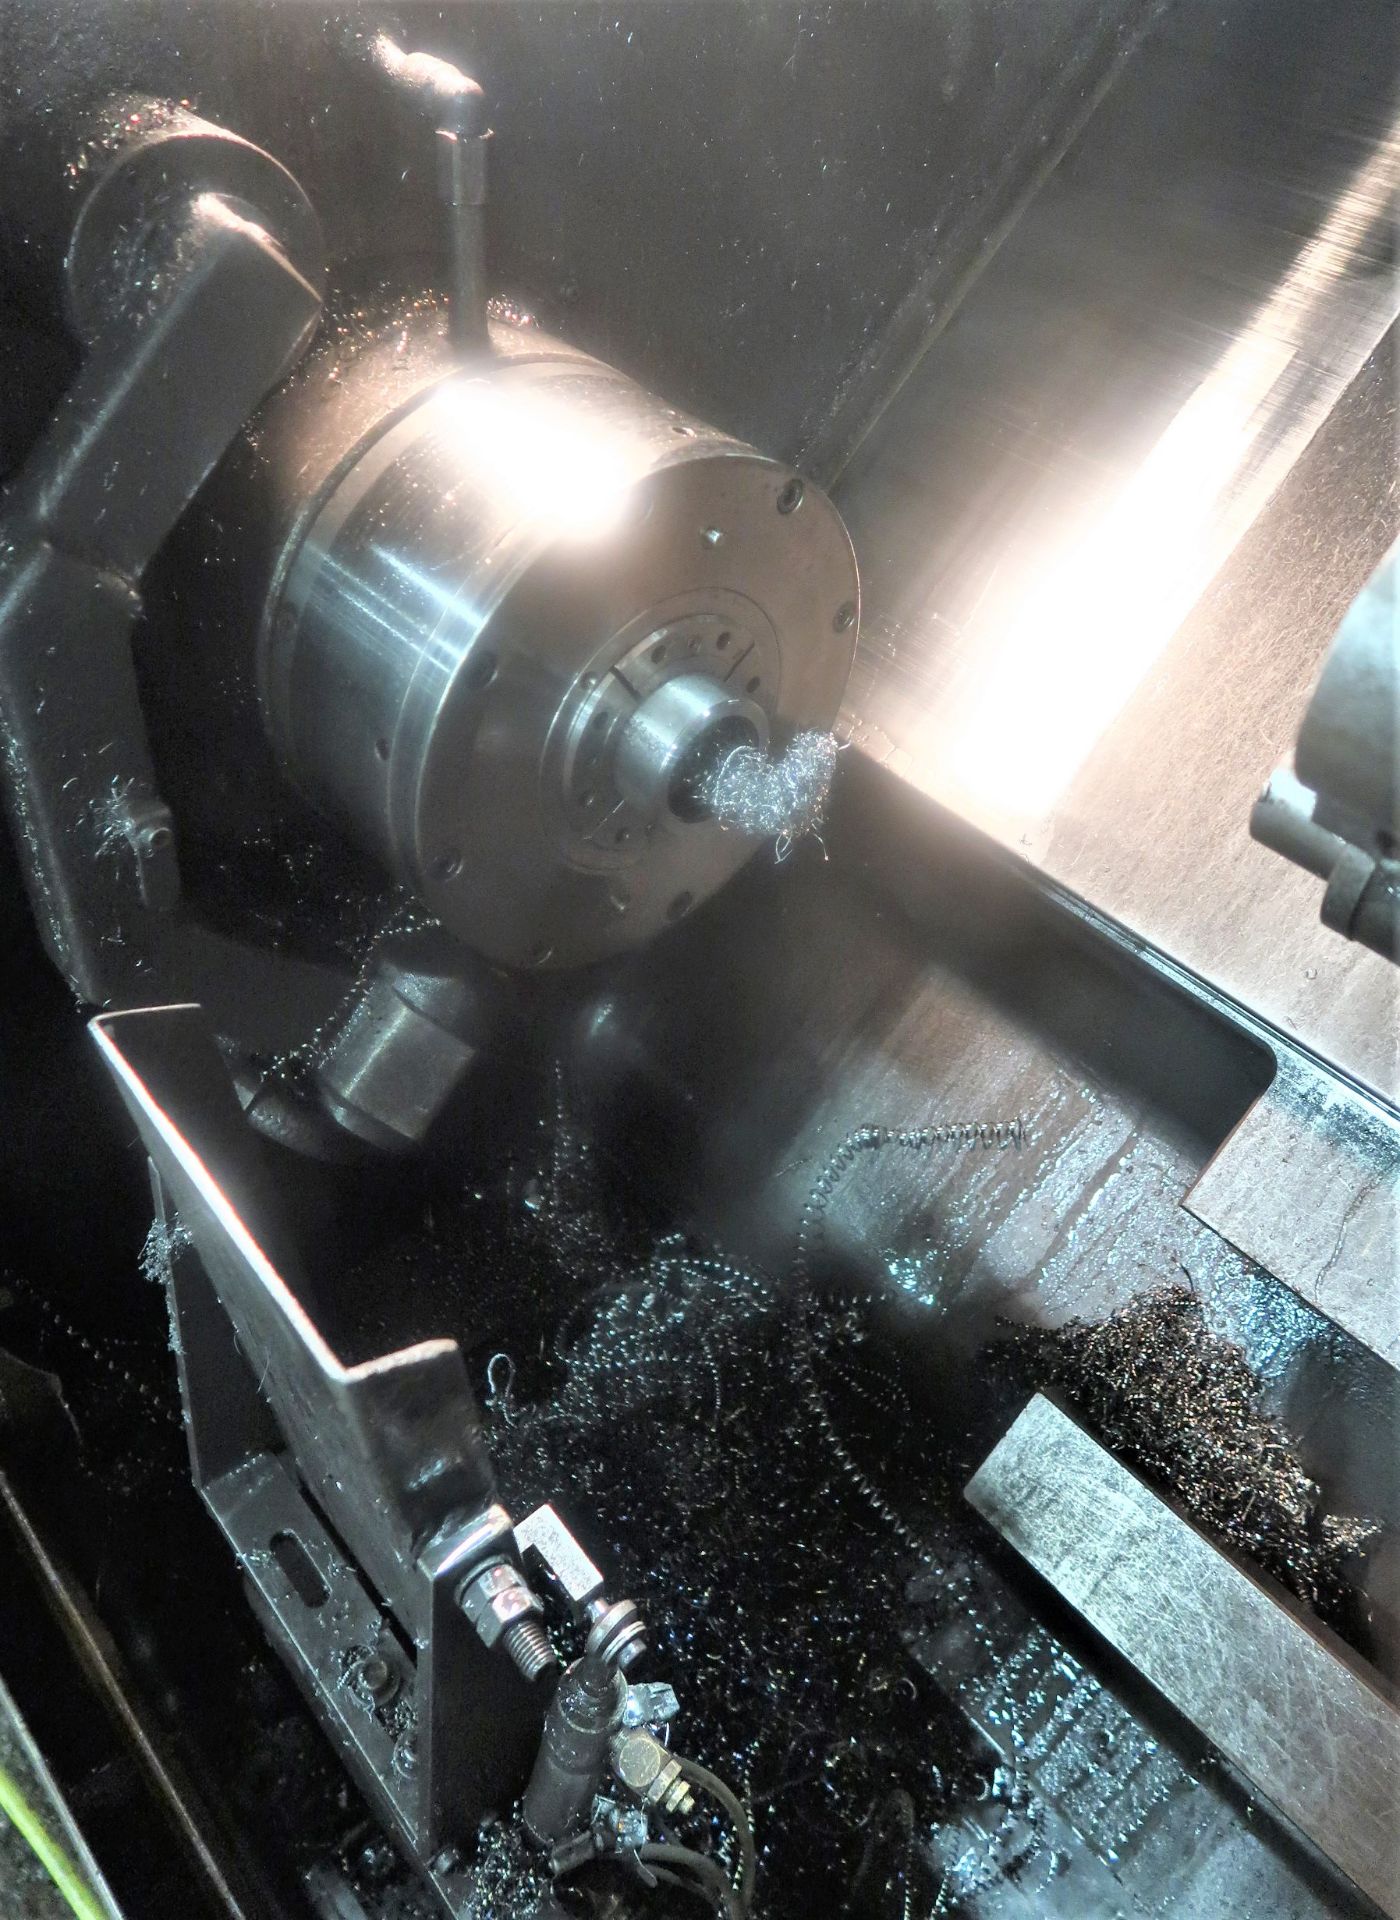 MORI SEIKI SL-25 CNC 2-AXIS TURNING CENTER LATHE WITH LNS QUICK LOAD BAR FEED - Image 17 of 18